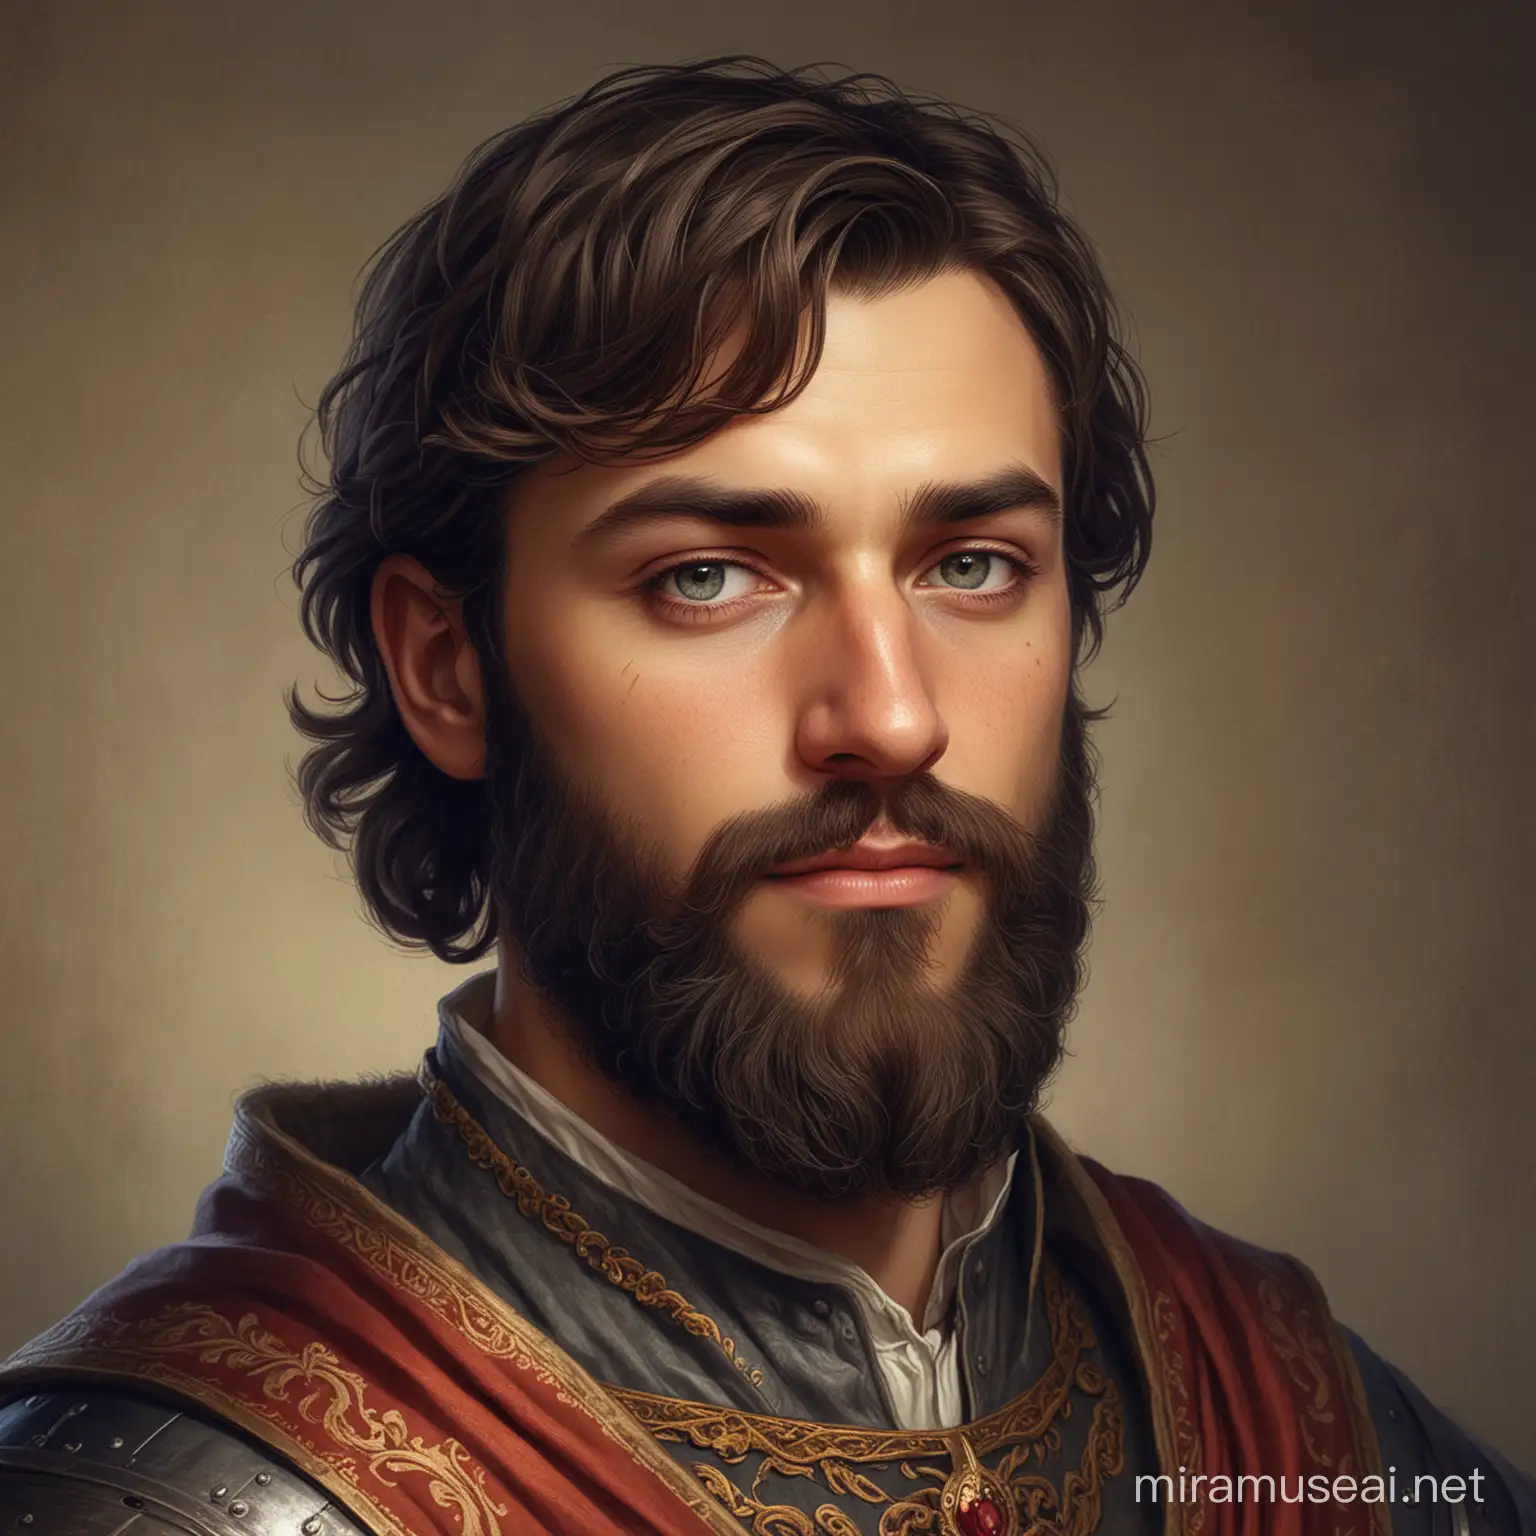 Medieval Nobleman with Distinctive Beard and Eyebrows